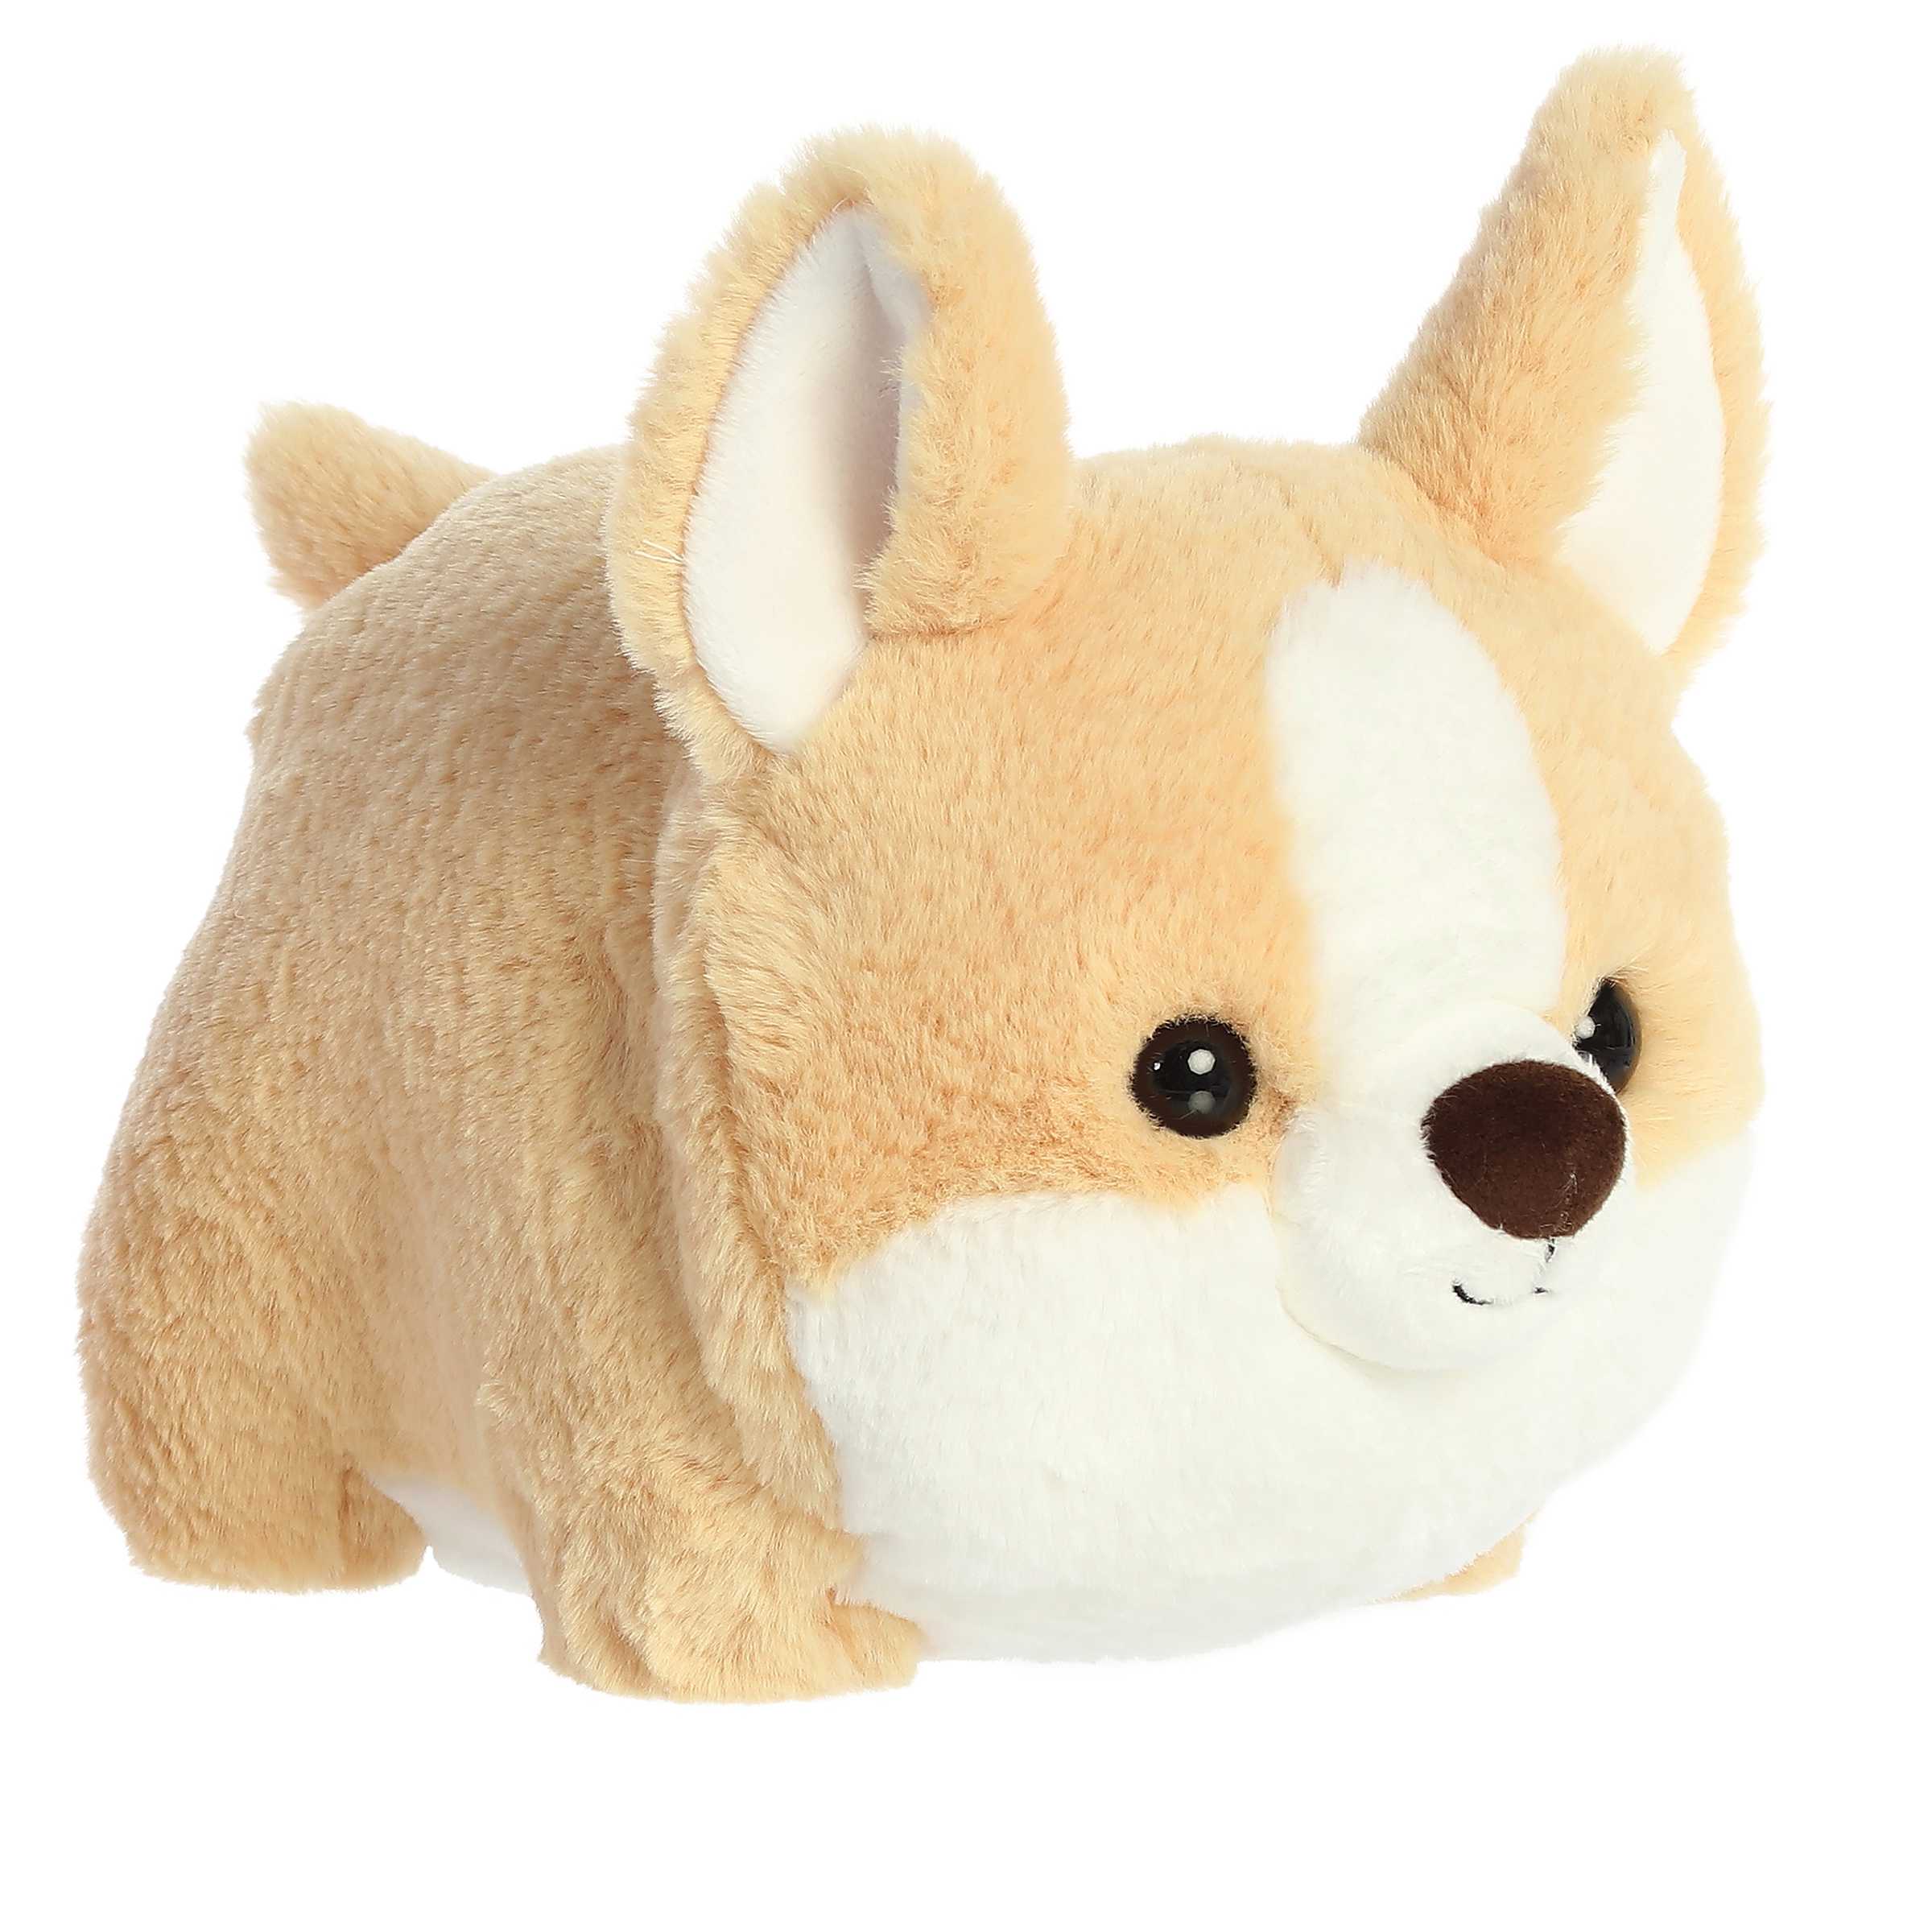 Colby Corgi from Spudsters, features a potato-shaped body and lovable face, ideal for premium hugs and comfort.